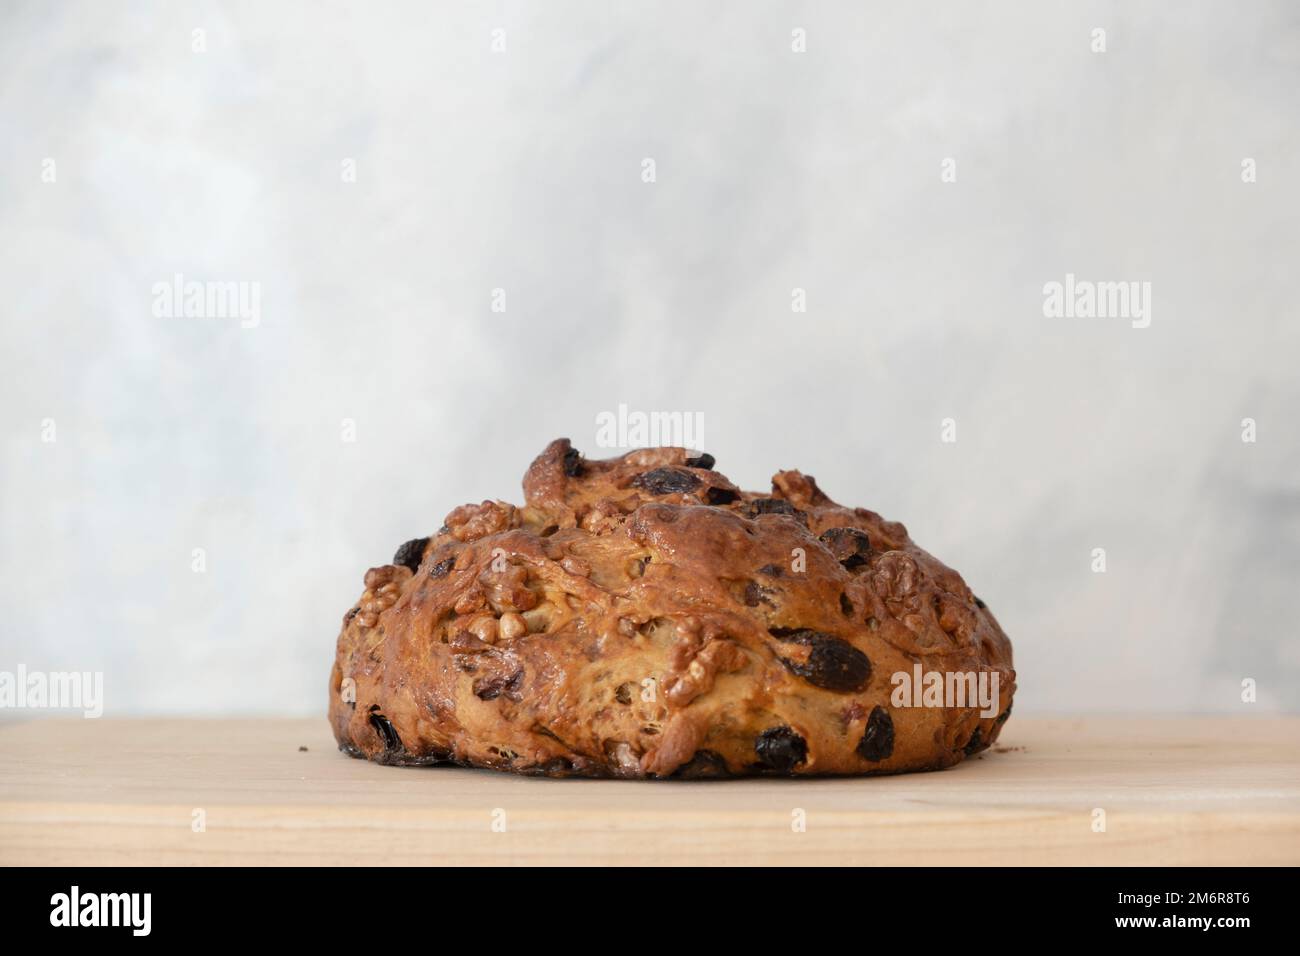 Home made pan co' Santi, traditional sweet bread from Siena, Tuscany, Italy Stock Photo